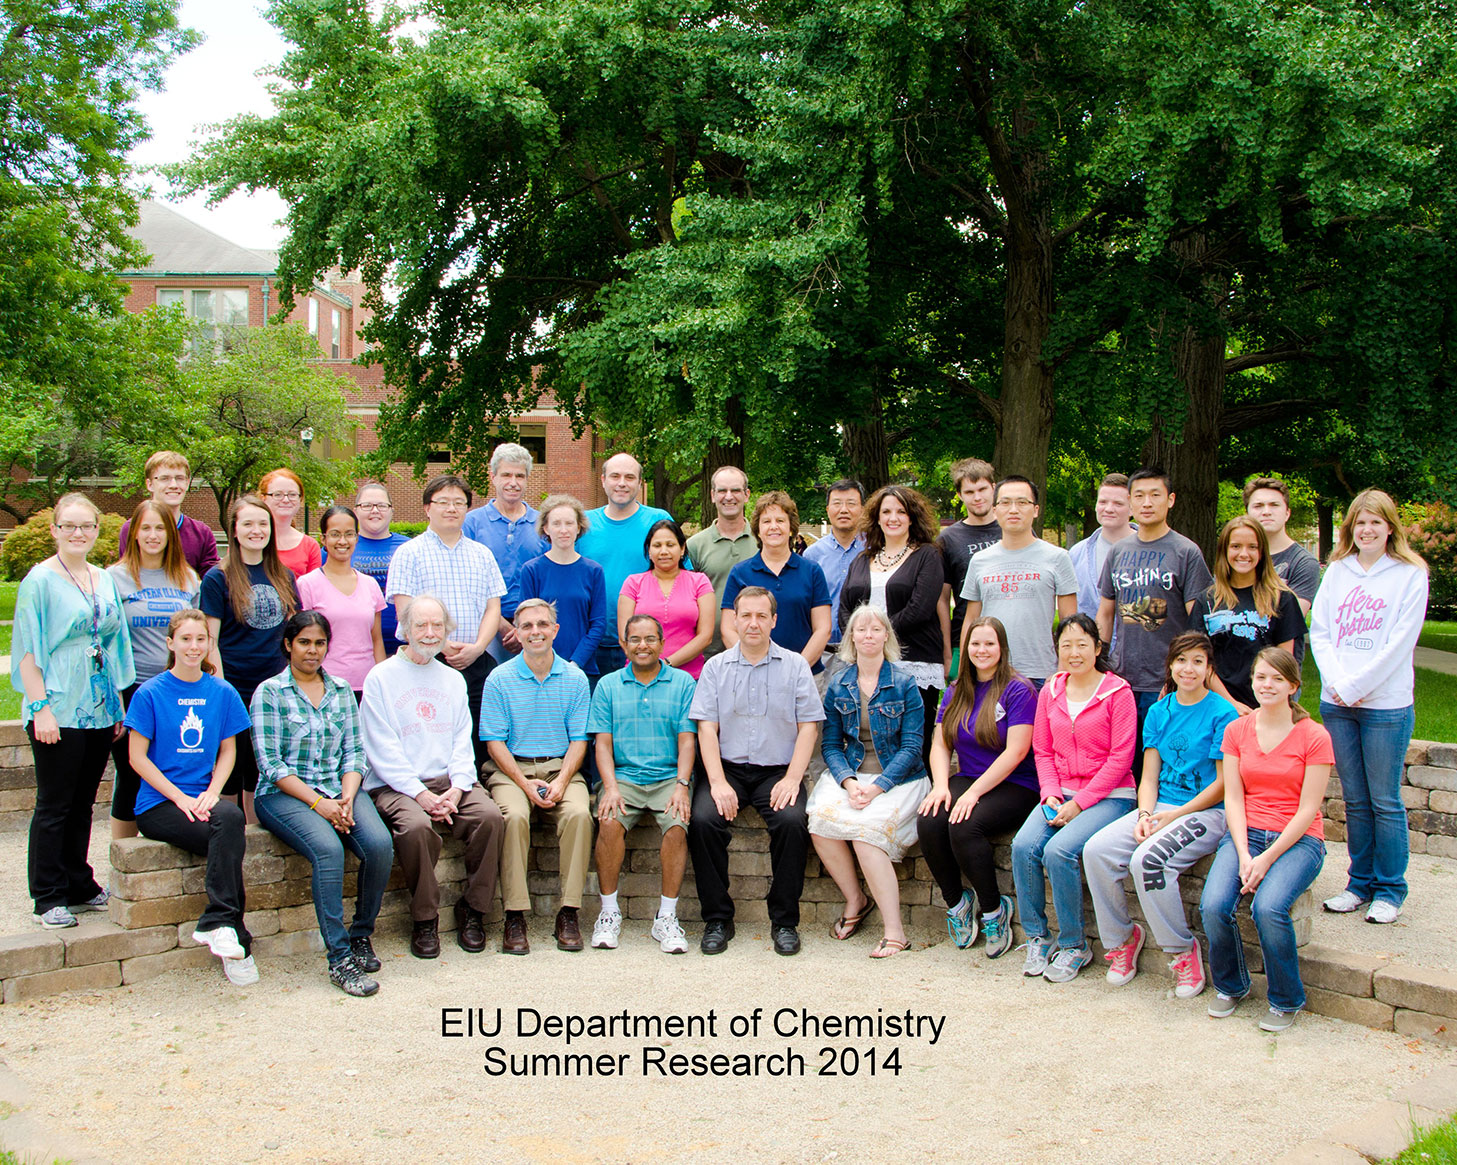 2014 Summer research group